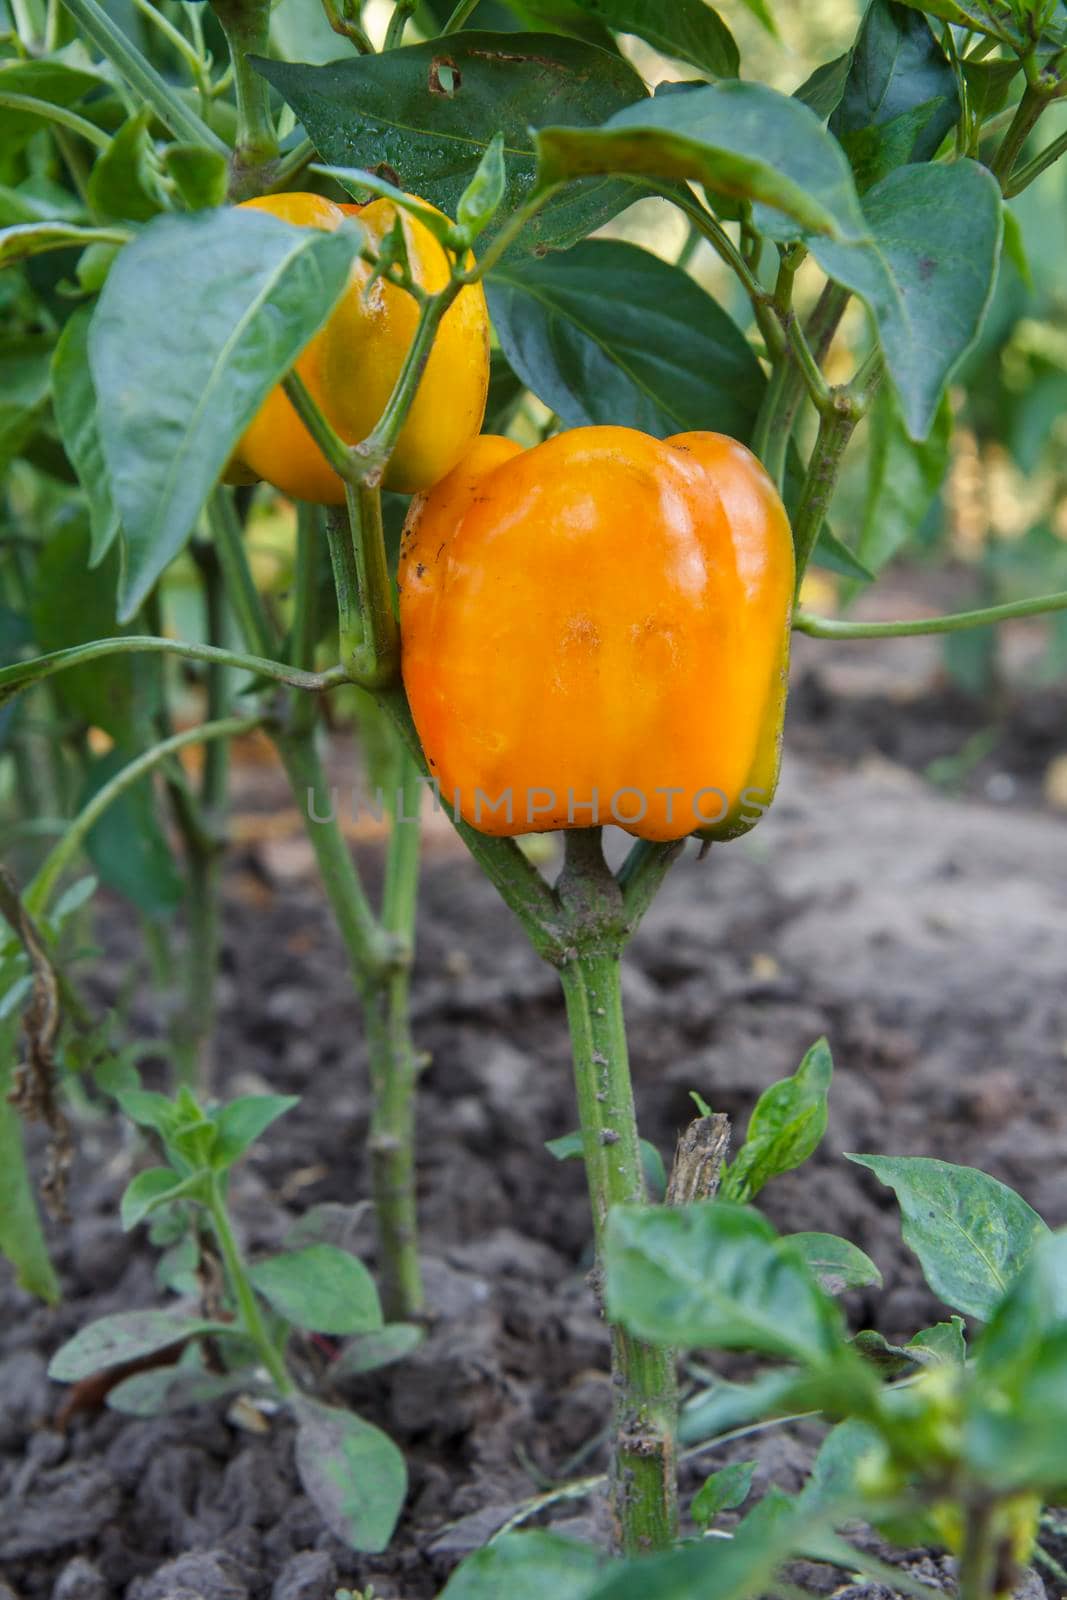 Bell peppers growing on a bush in the garden. Bulgarian or sweet pepper plant. Shallow depth of field